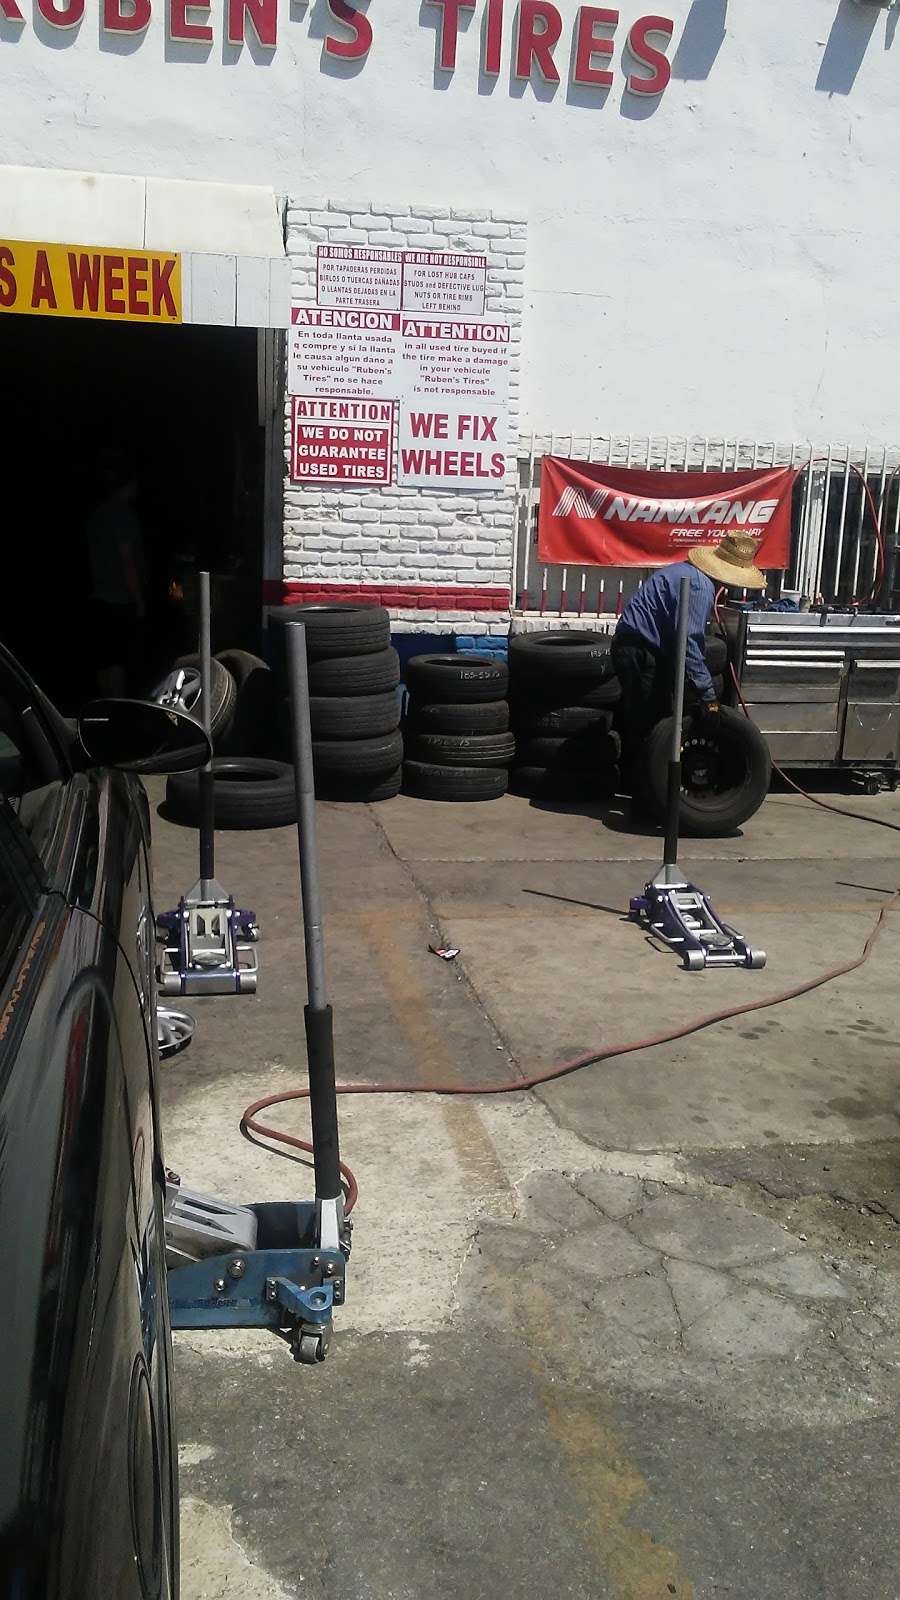 Rubens Tires | 13718 Old 215 Frontage Rd, Moreno Valley, CA 92553, USA | Phone: (951) 653-9158